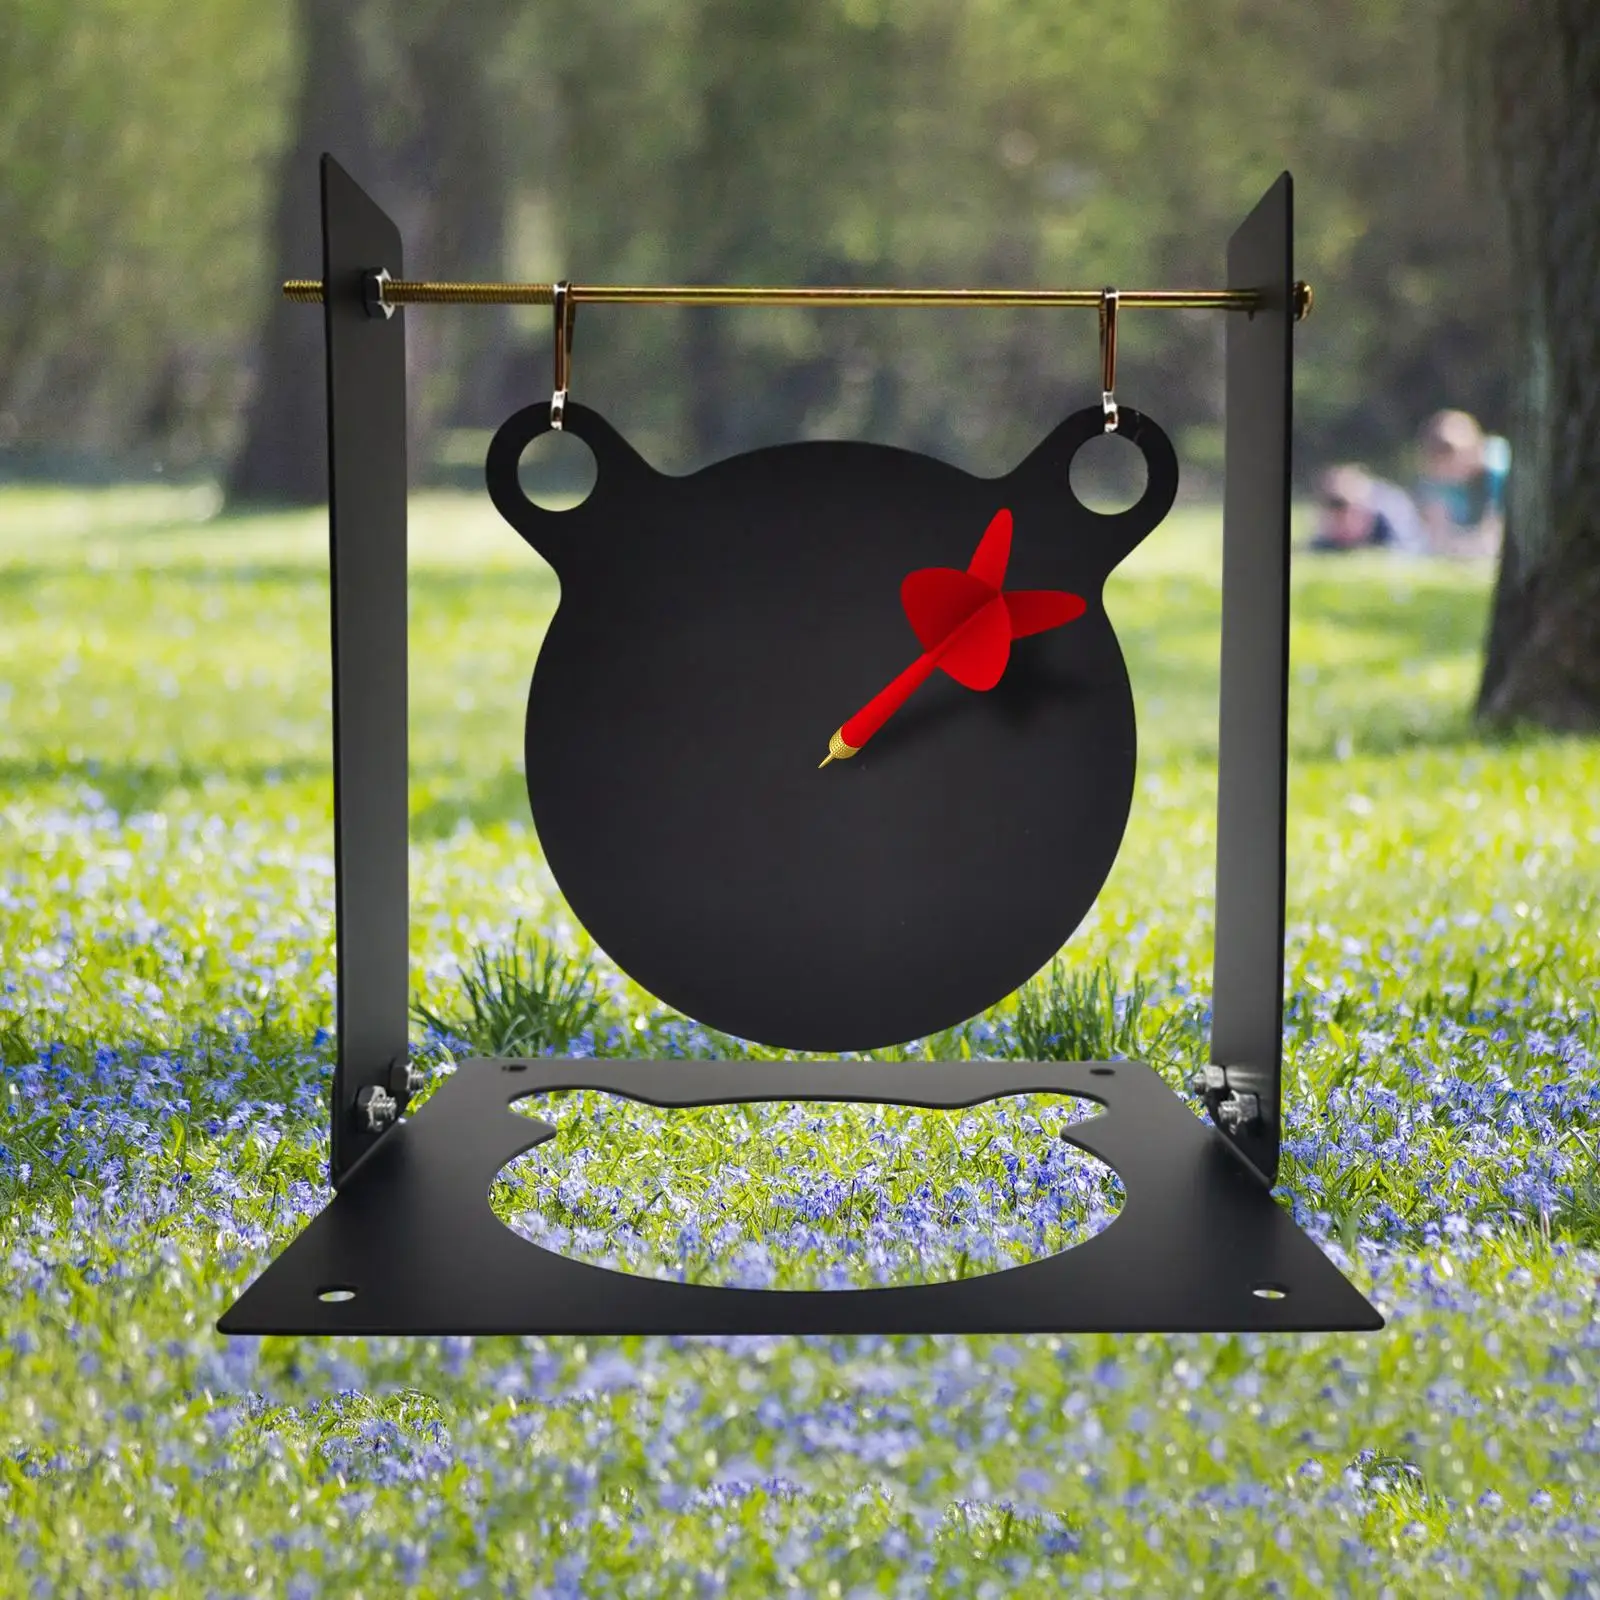 Portable Hunting Training Target Outdoor Sports Toy Target Trainer Target for